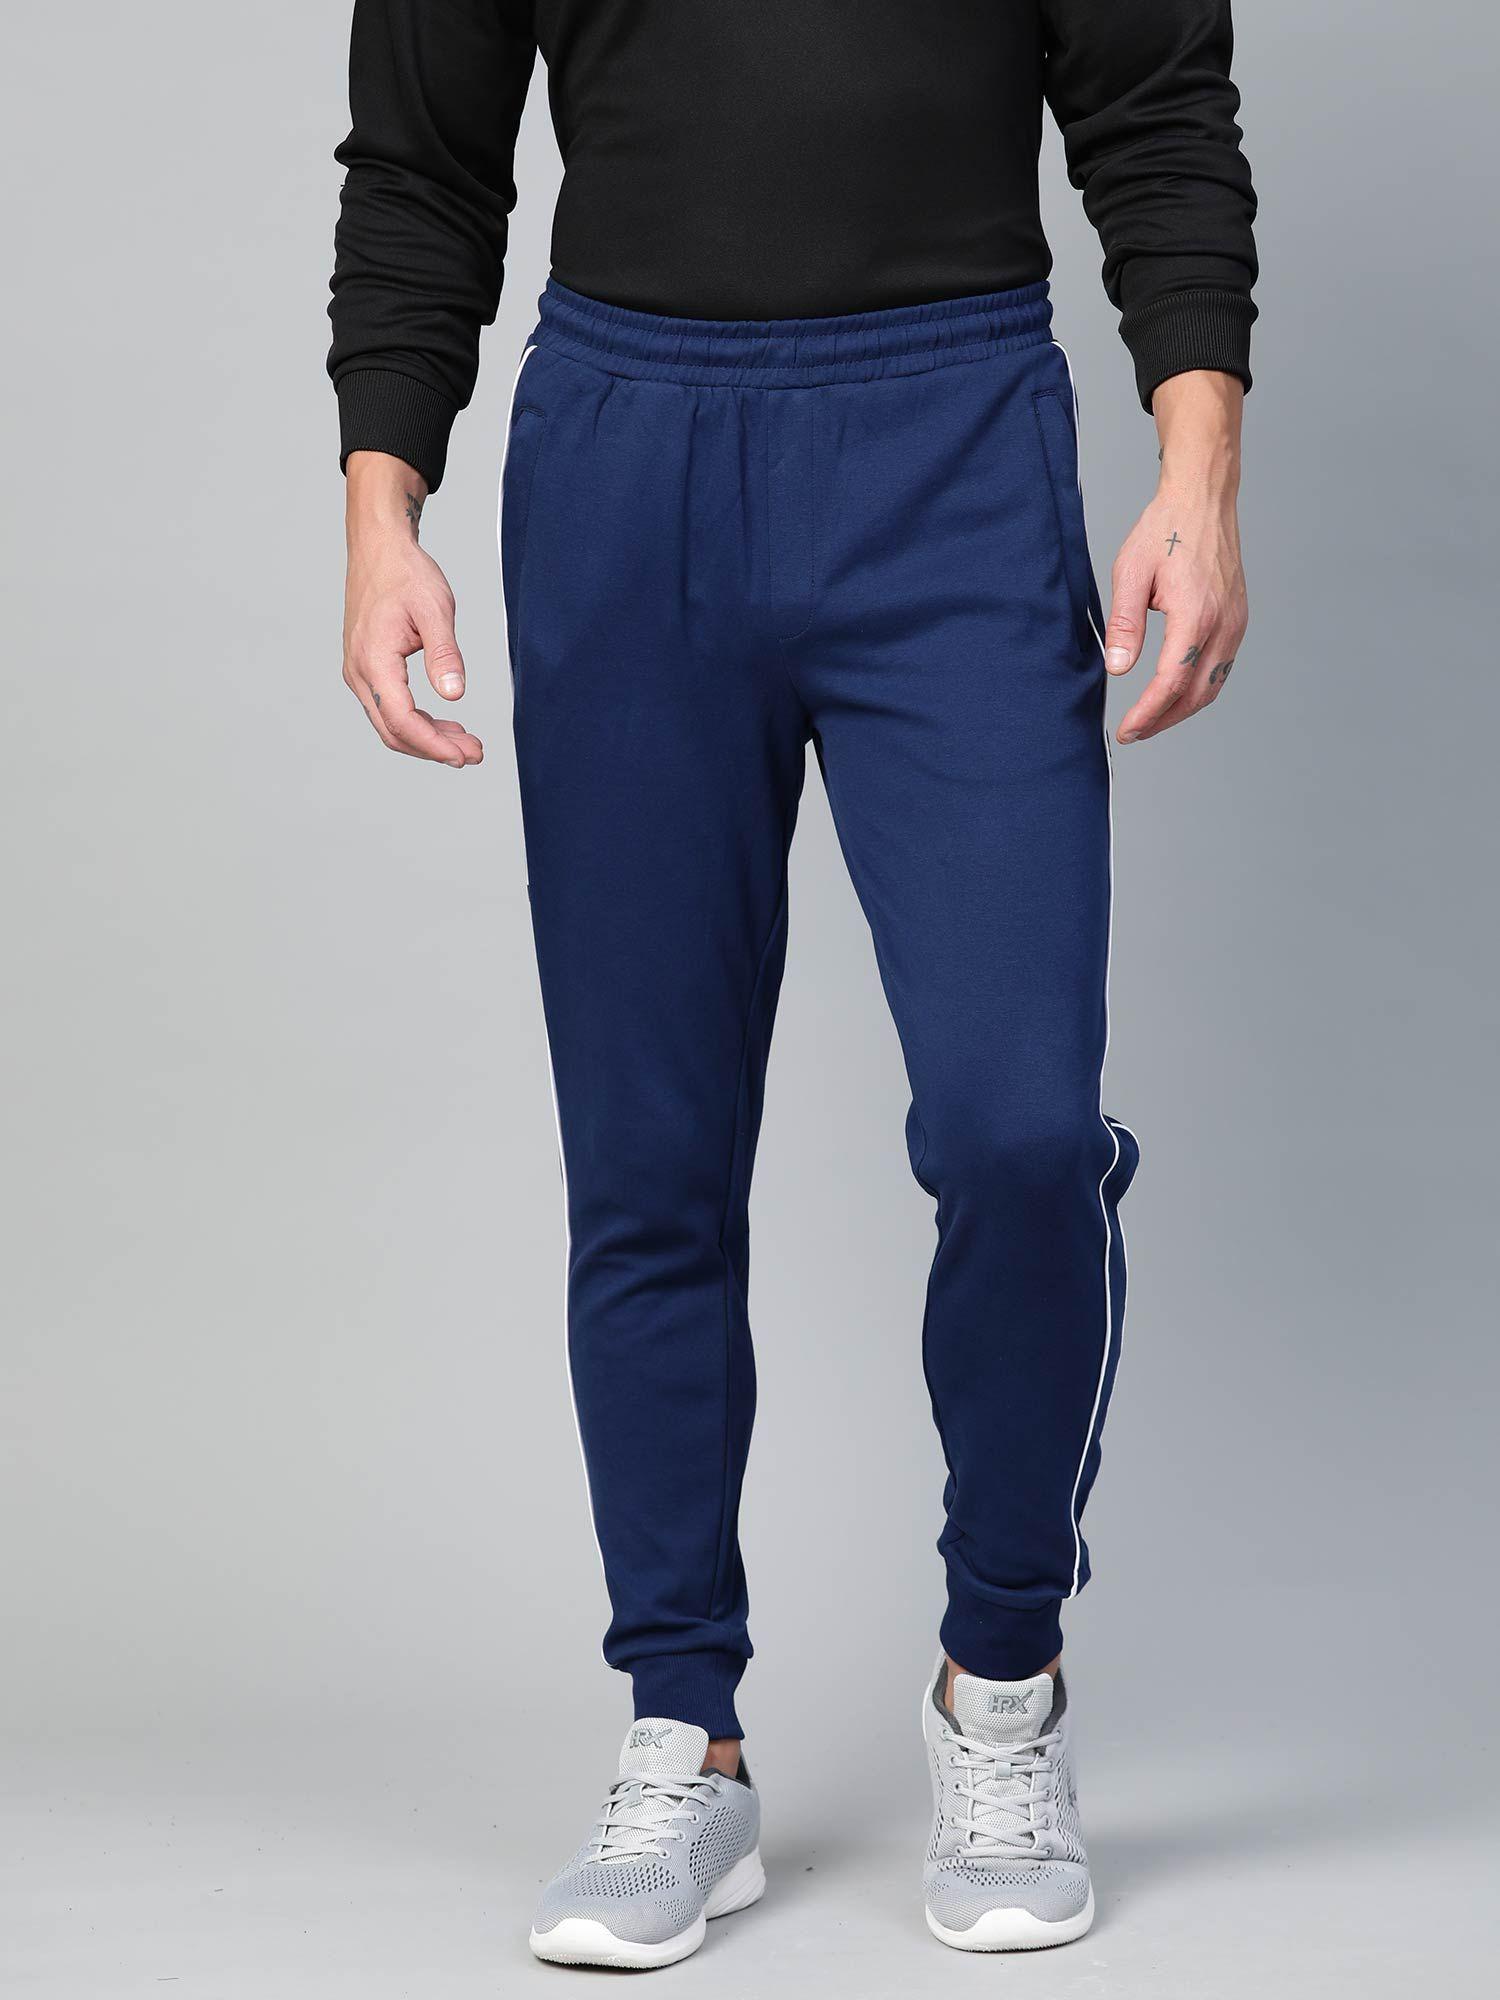 navy blue solid joggers with side striped detail